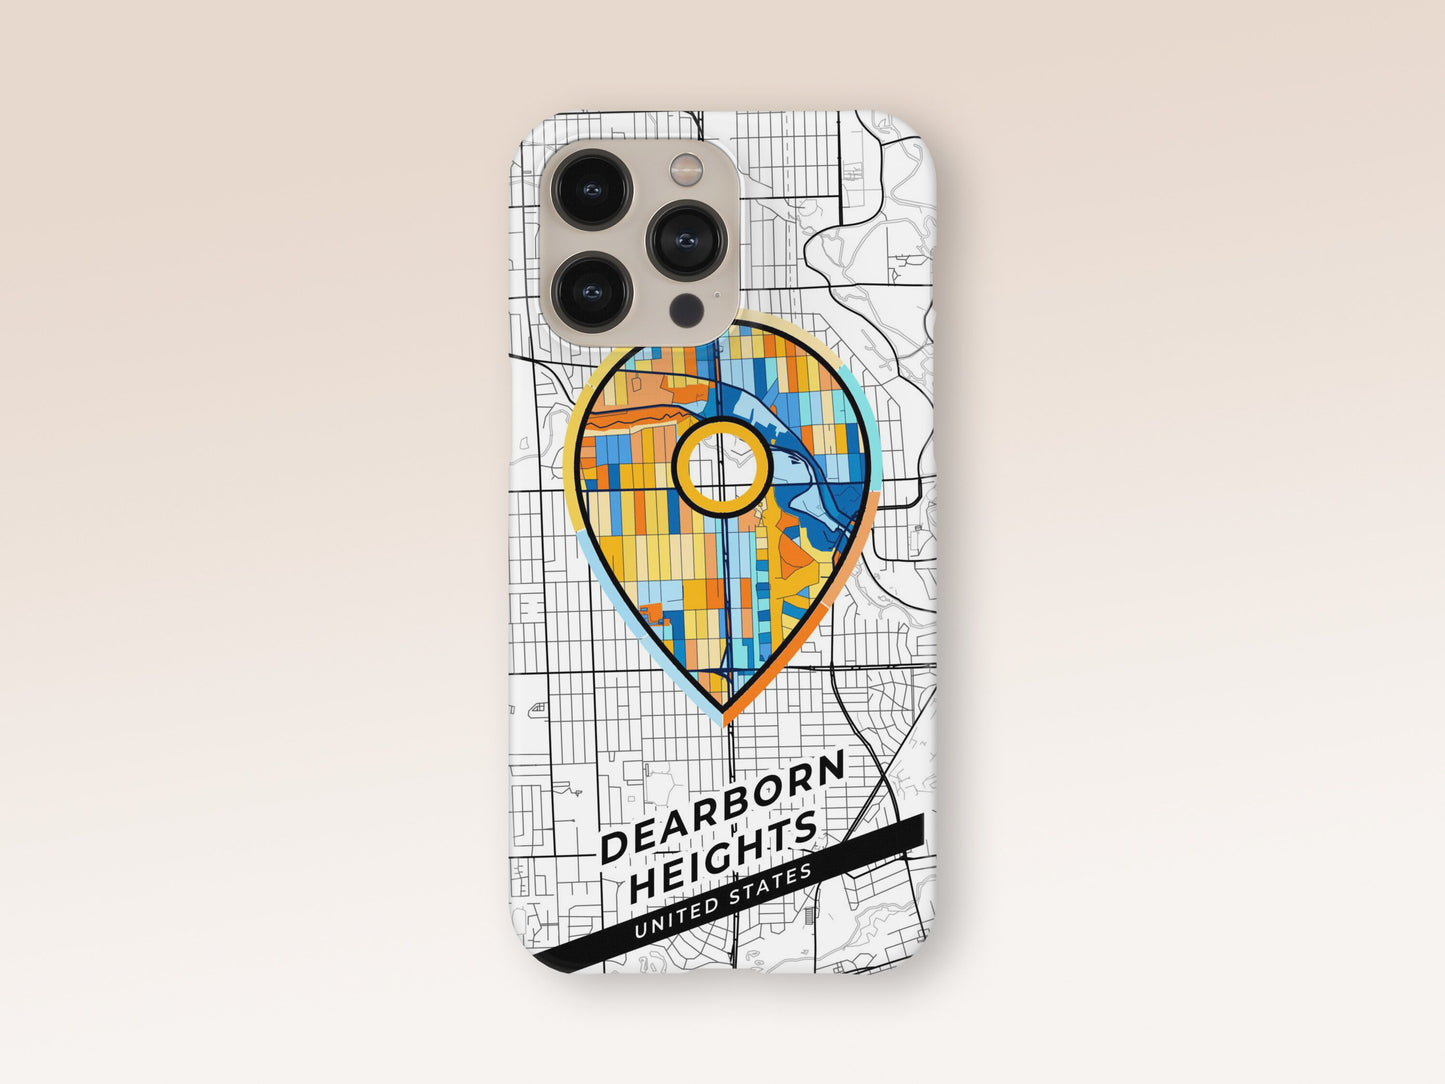 Dearborn Heights Michigan slim phone case with colorful icon. Birthday, wedding or housewarming gift. Couple match cases. 1